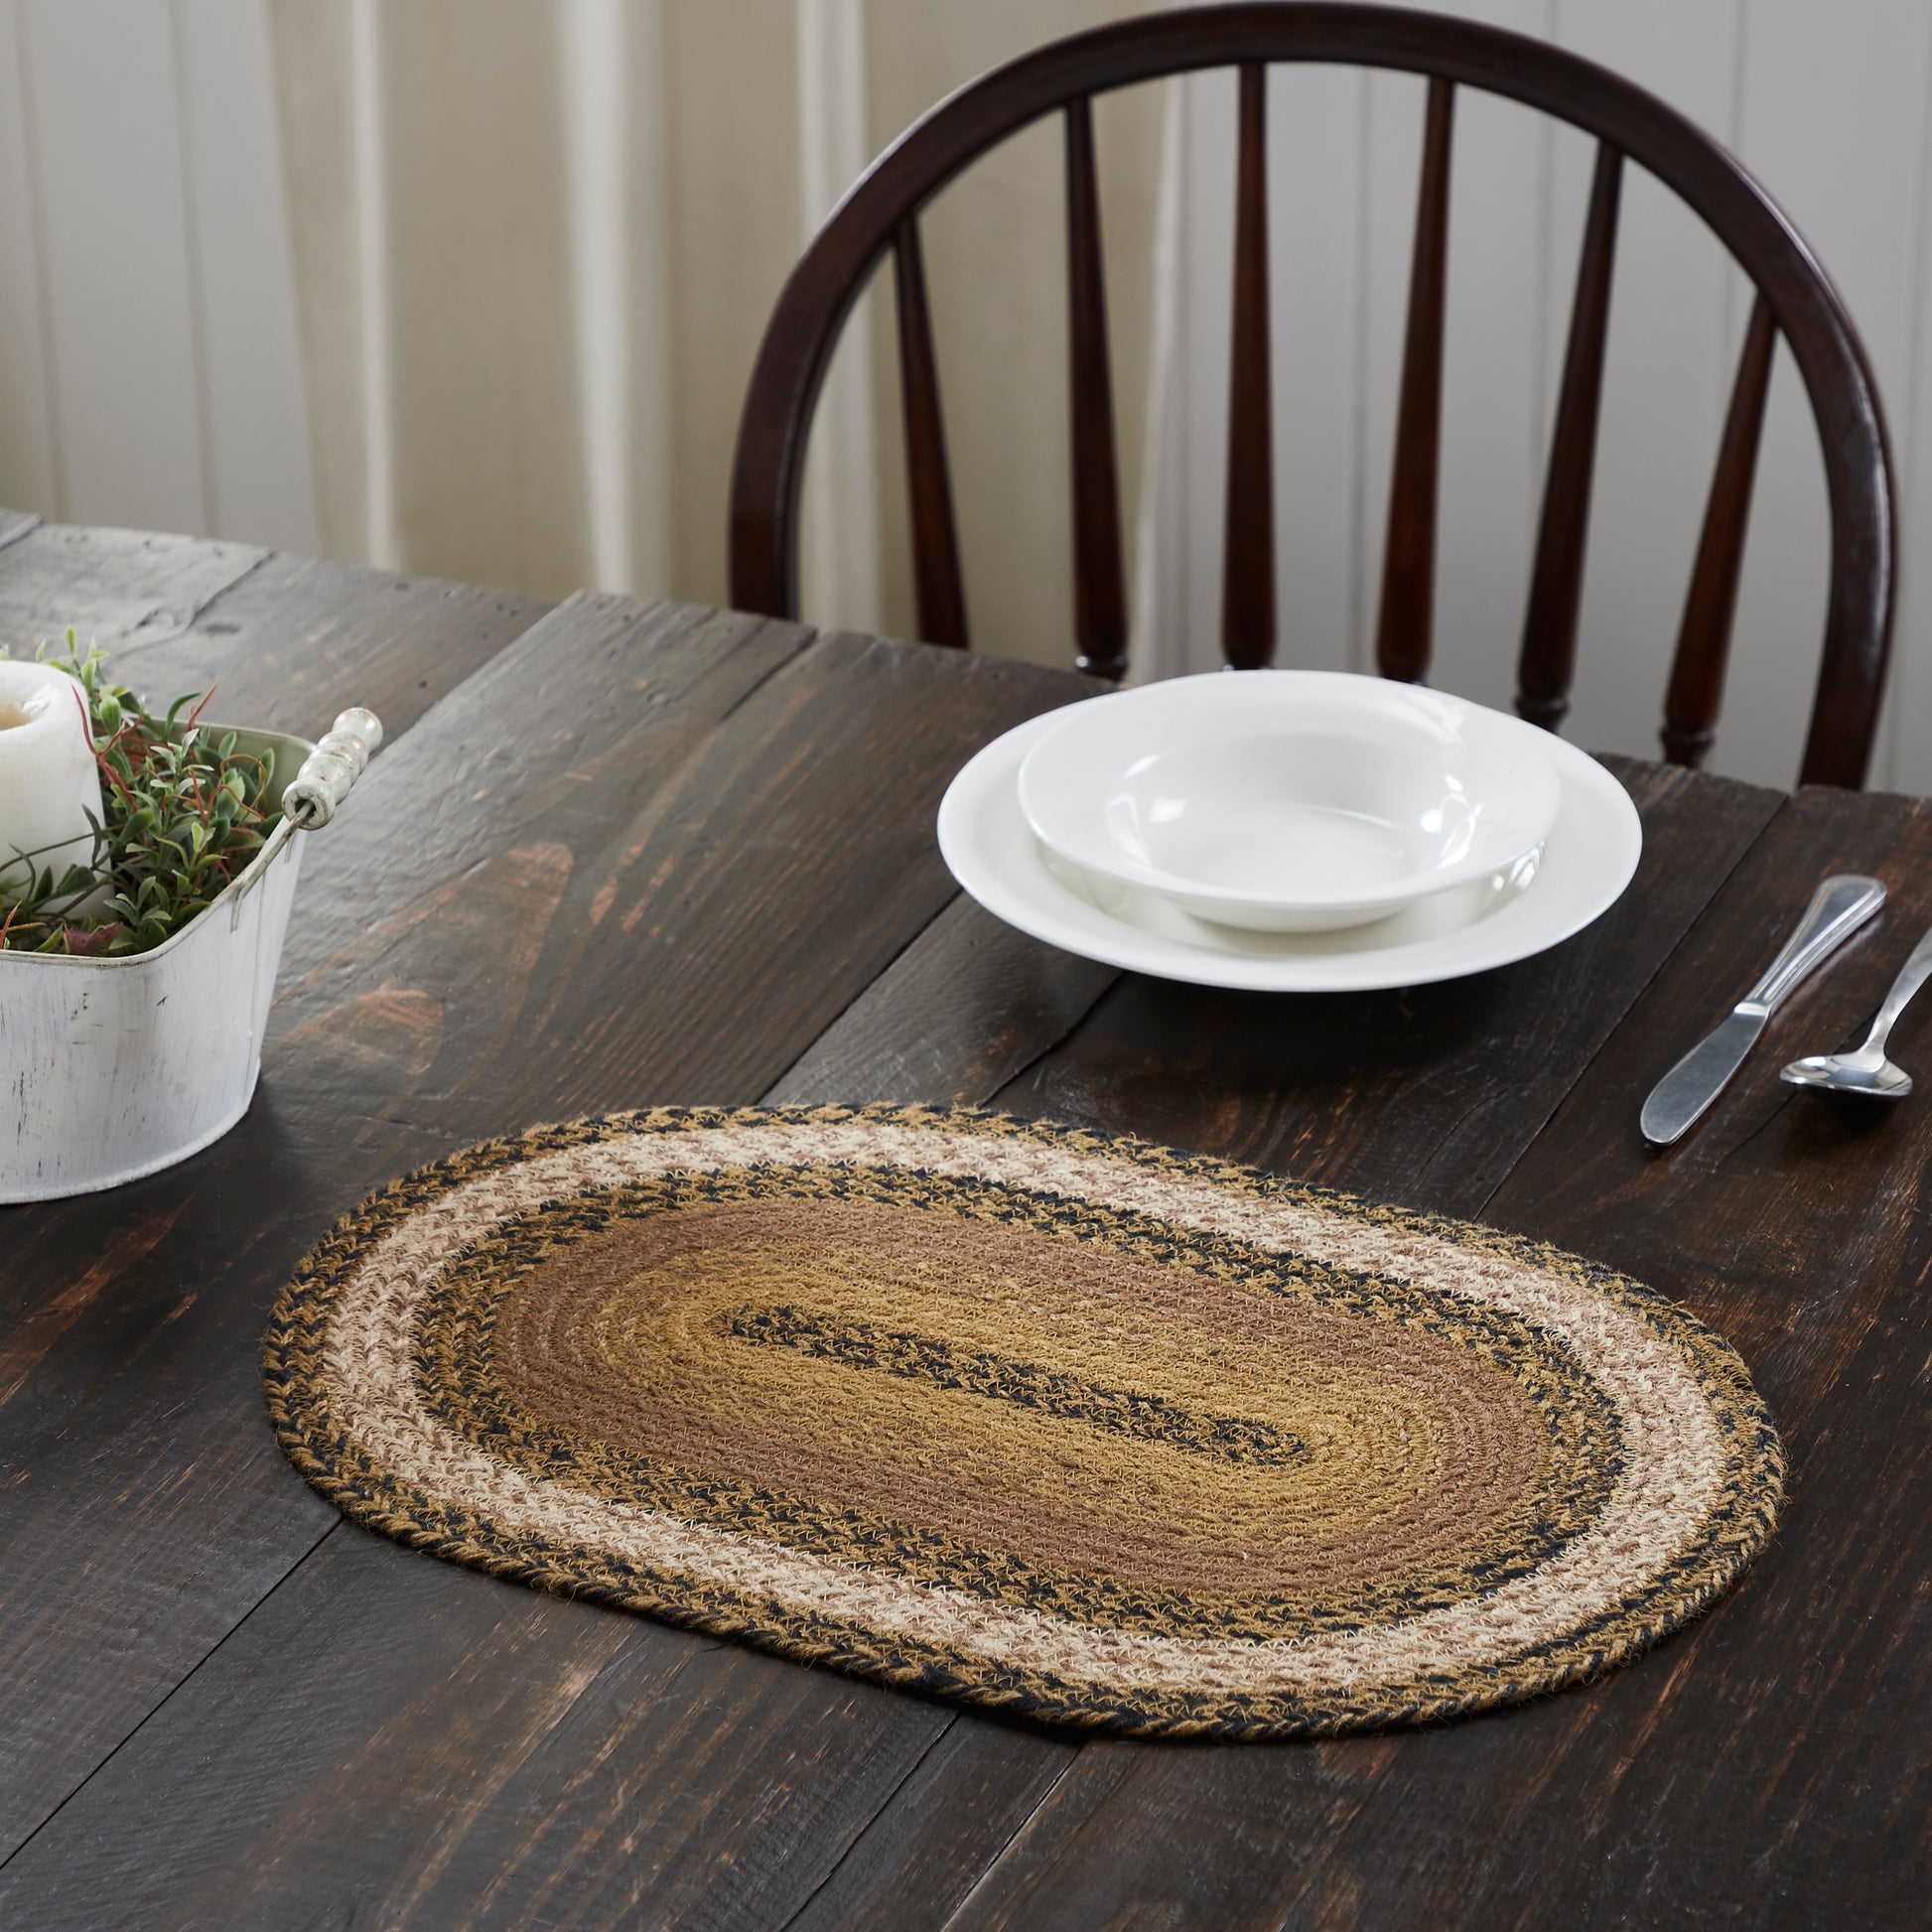 81387-Kettle-Grove-Jute-Oval-Placemat-12x18-image-5